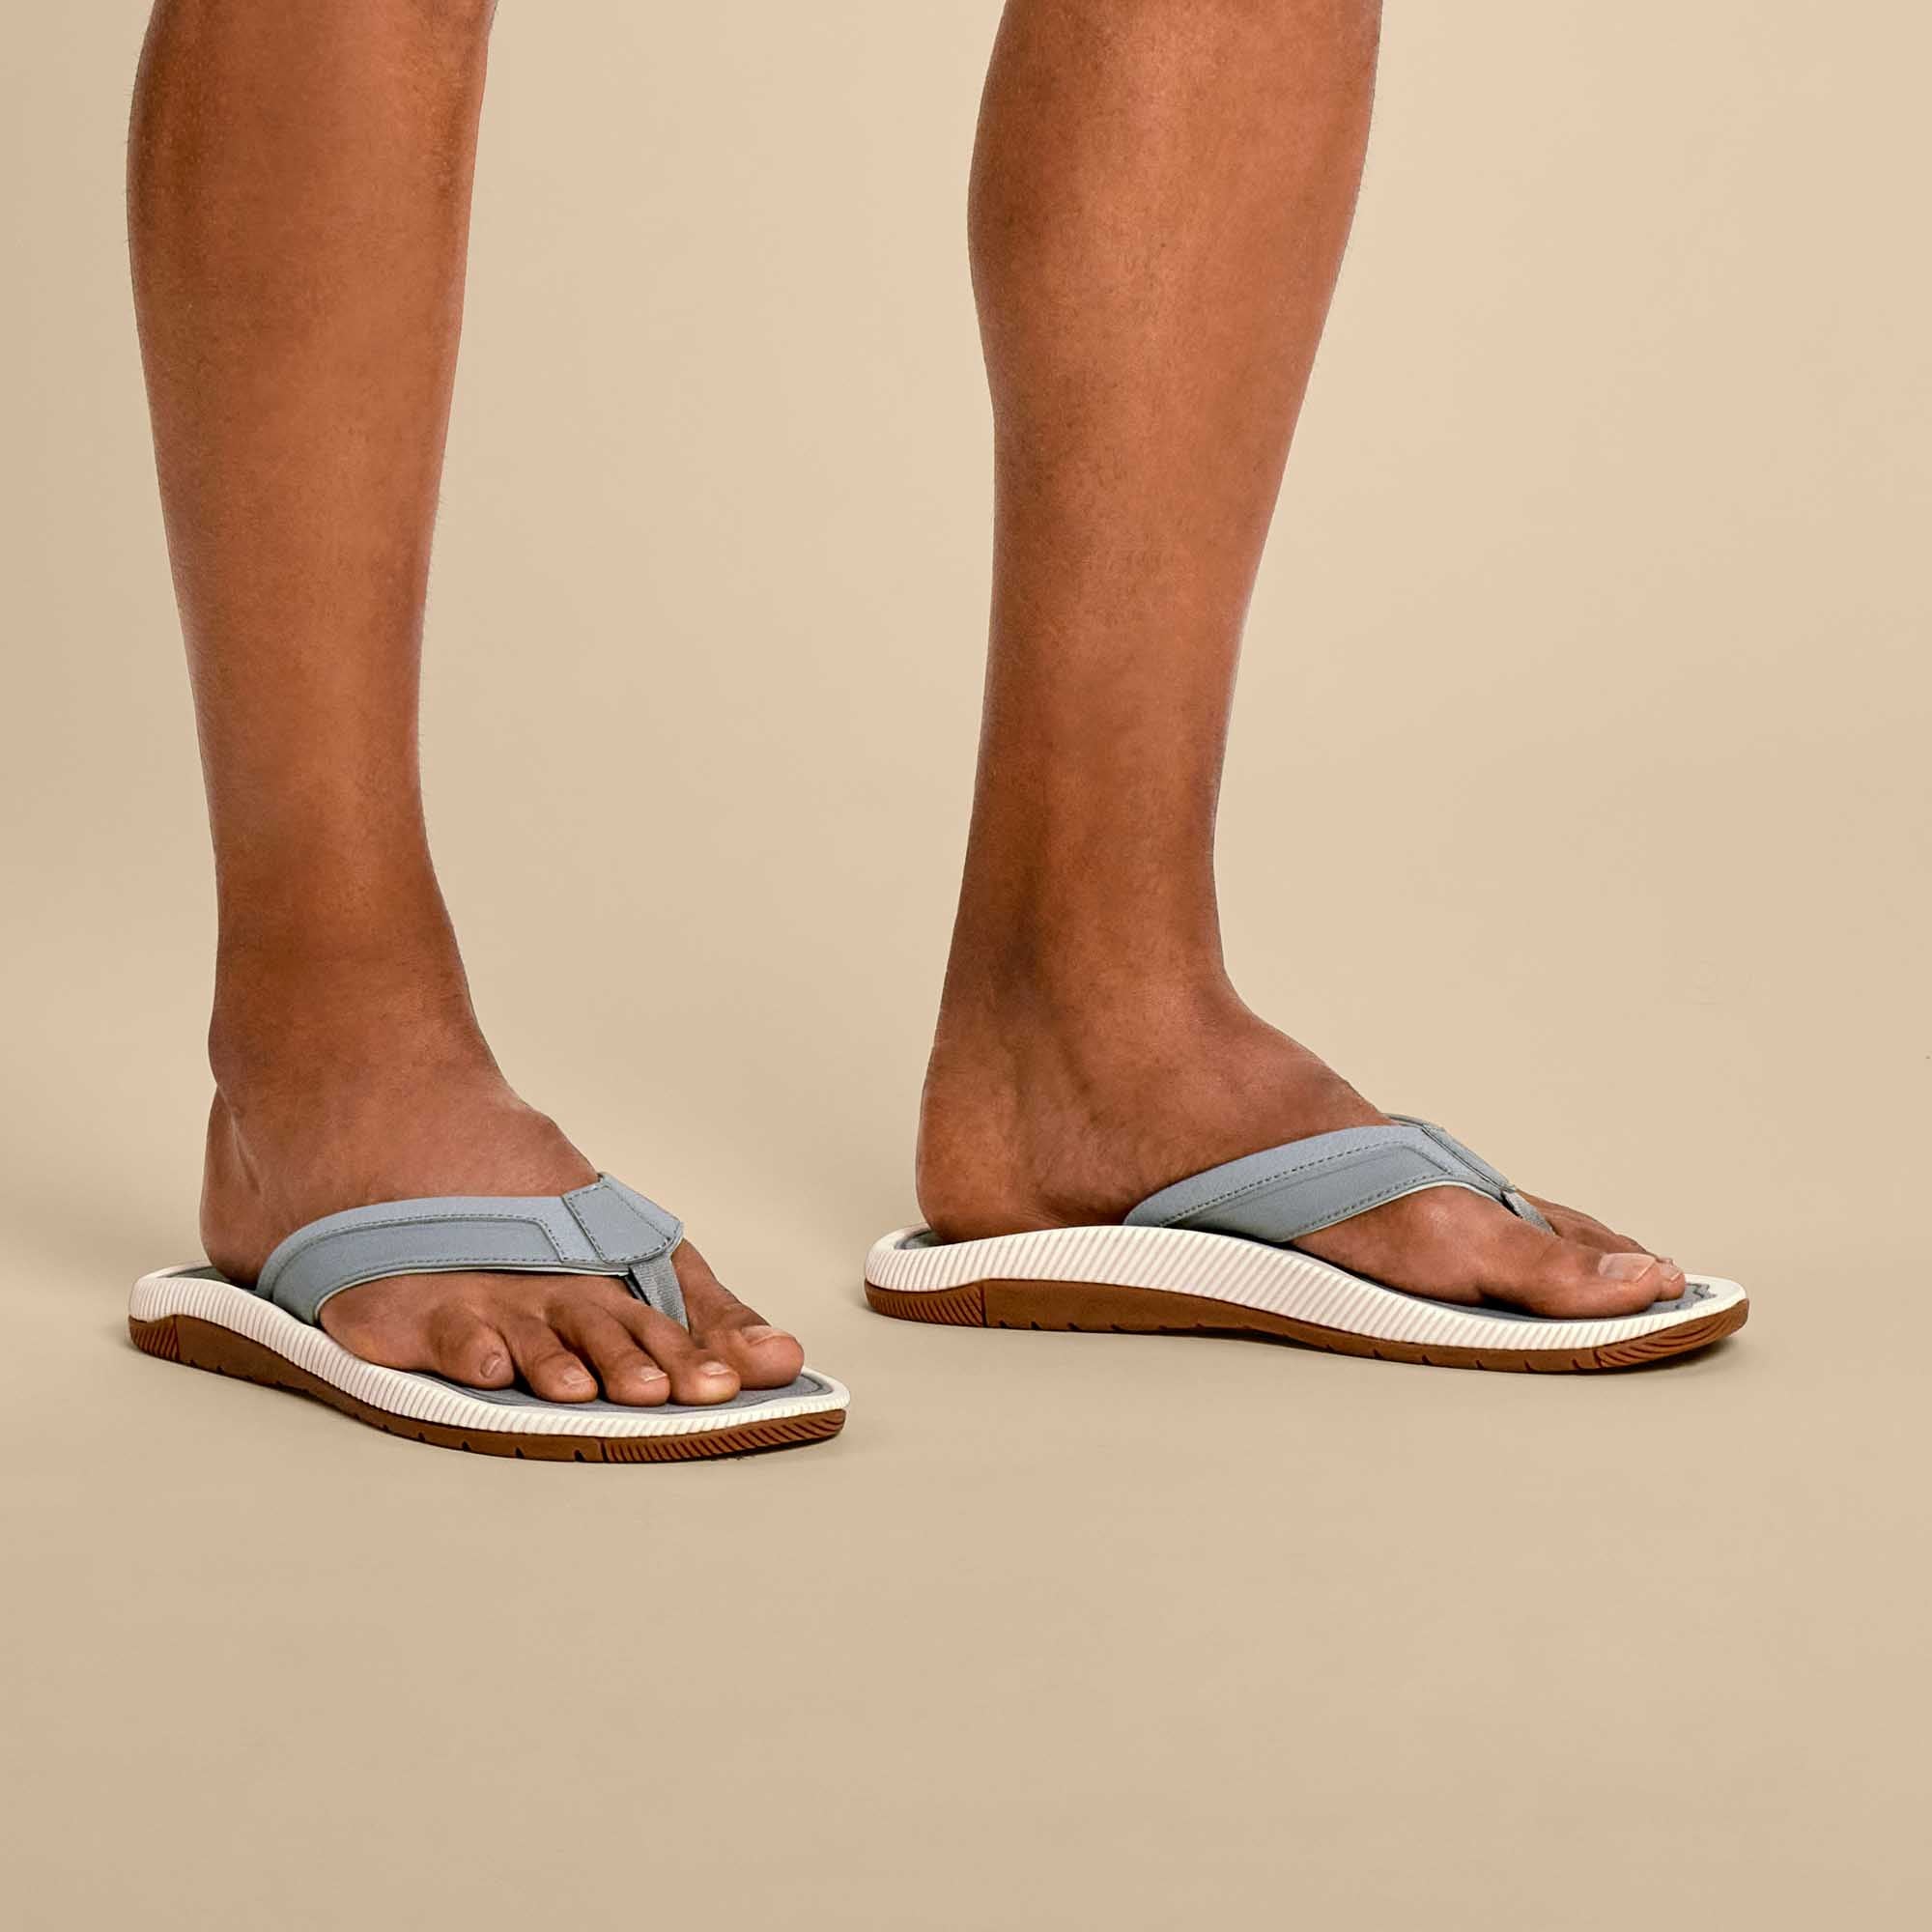 Tips for Choosing the Best Water Sandals